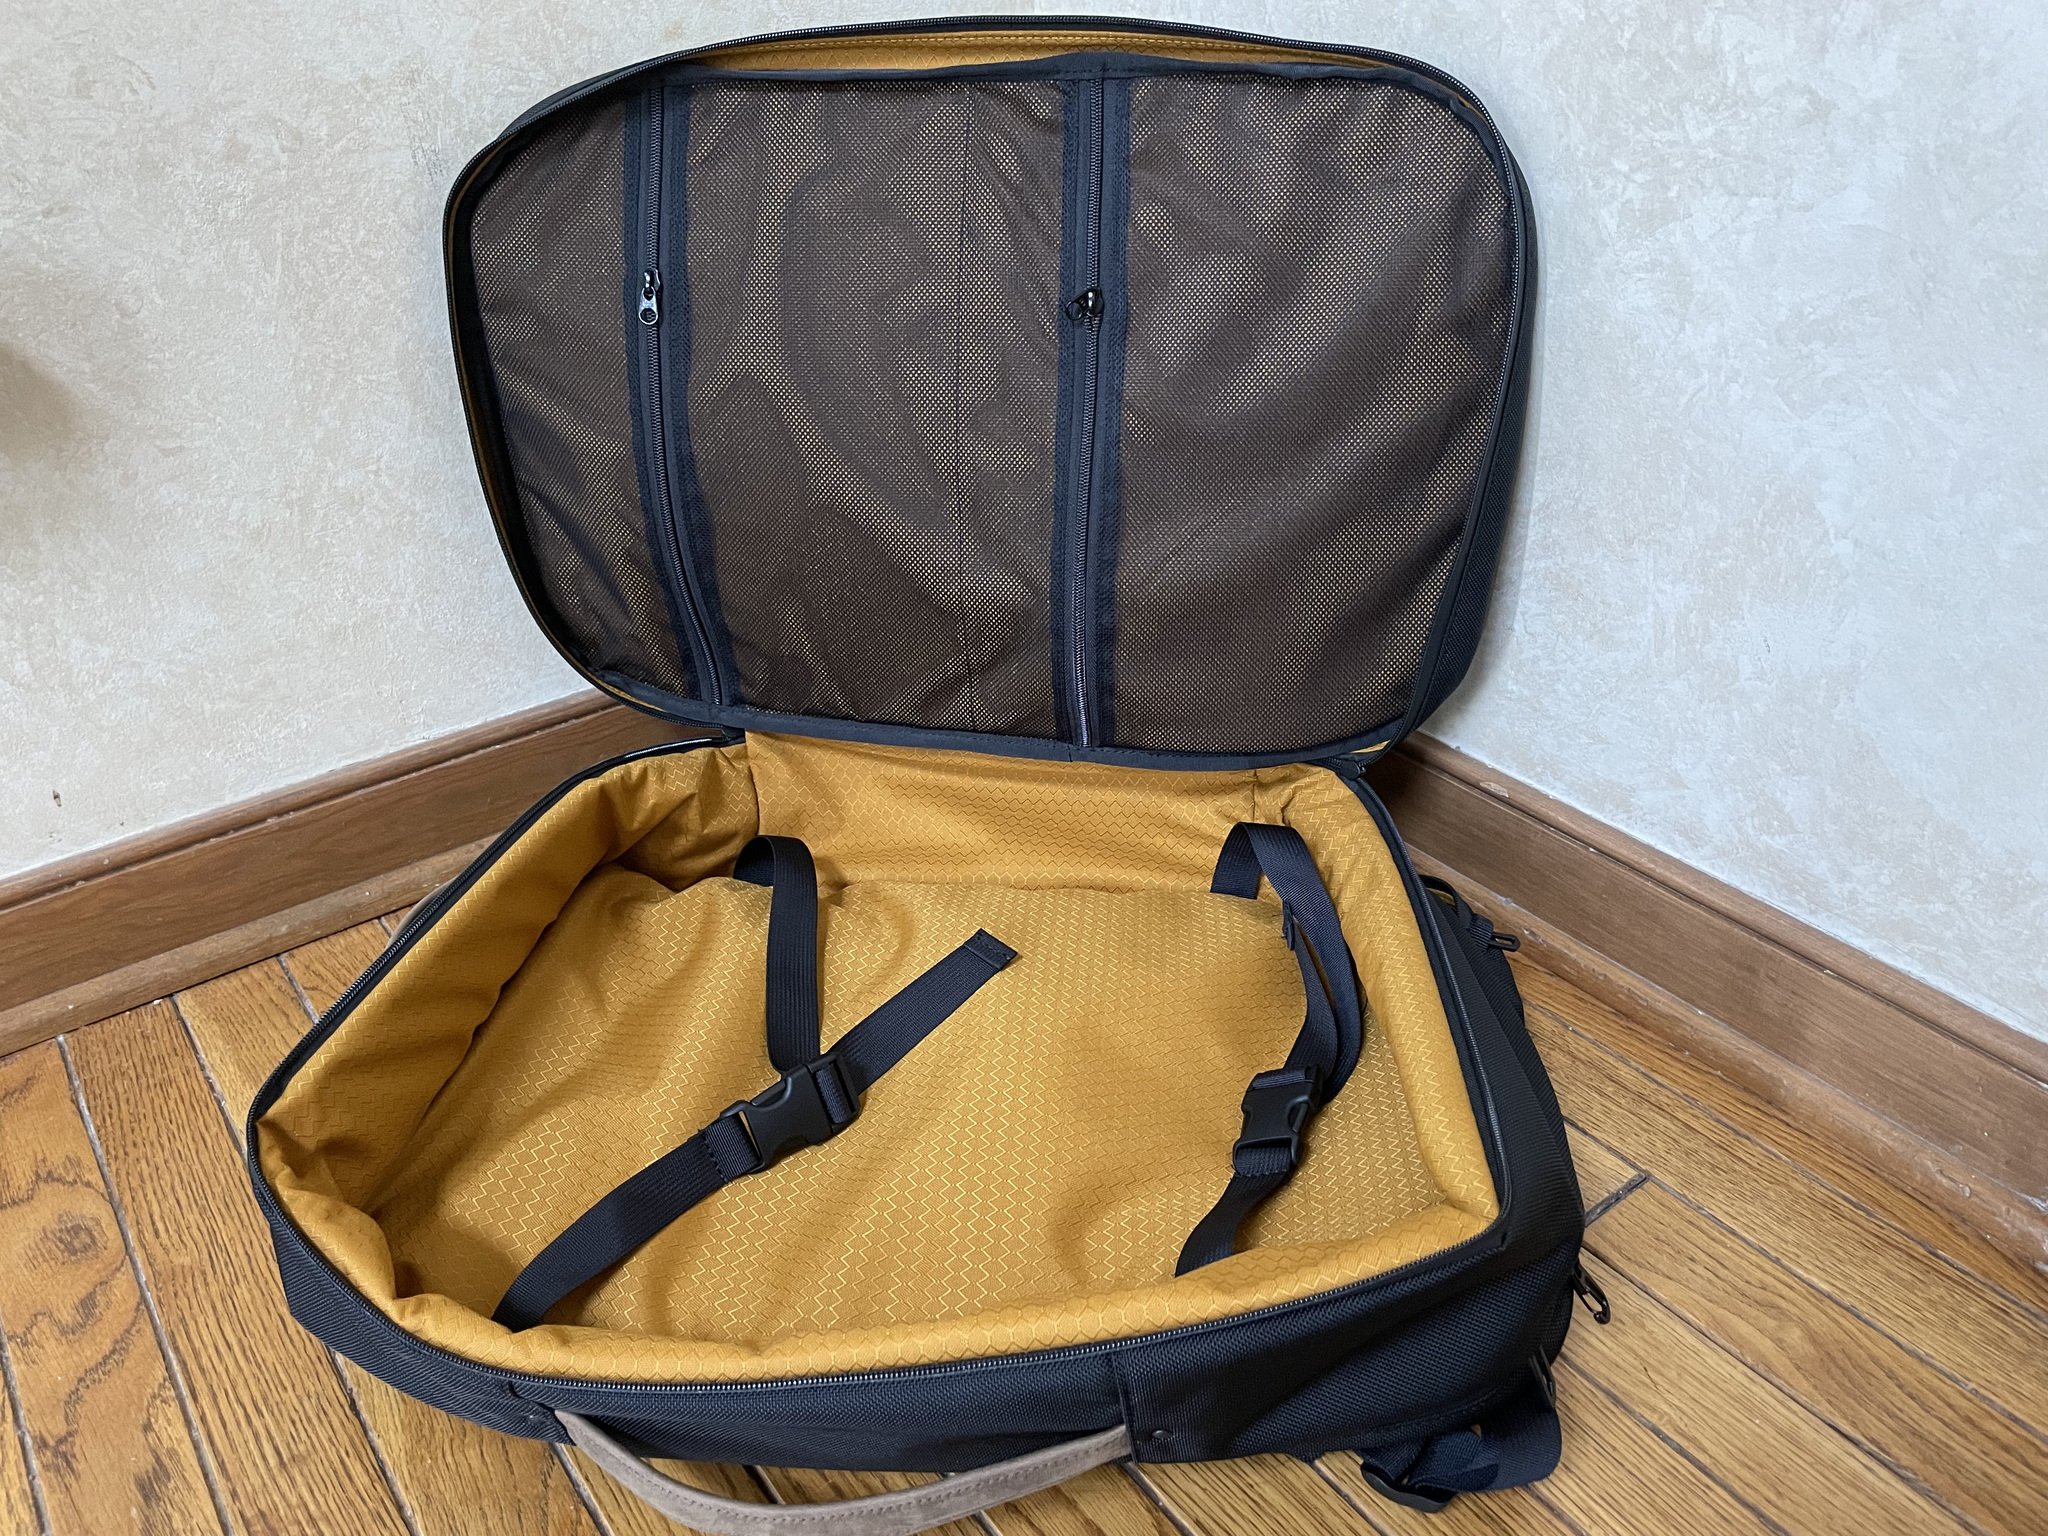 Waterfield Air Travel Backpack Lifestyle Open Travel Compartment